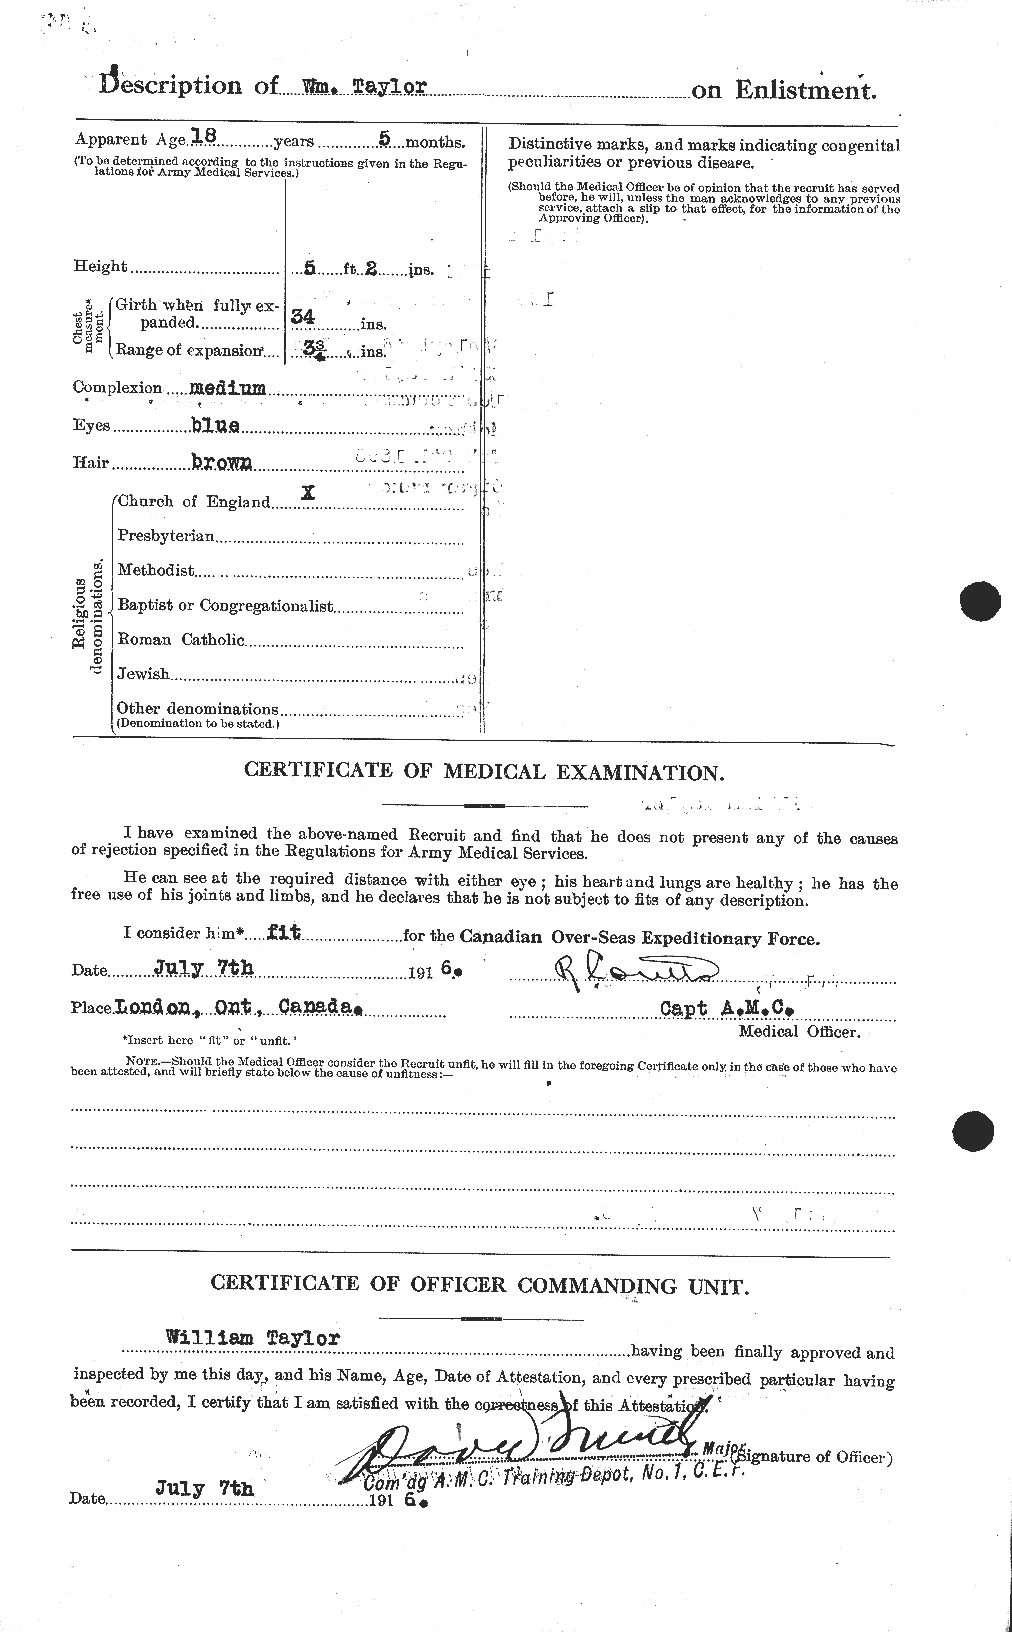 Personnel Records of the First World War - CEF 628177b